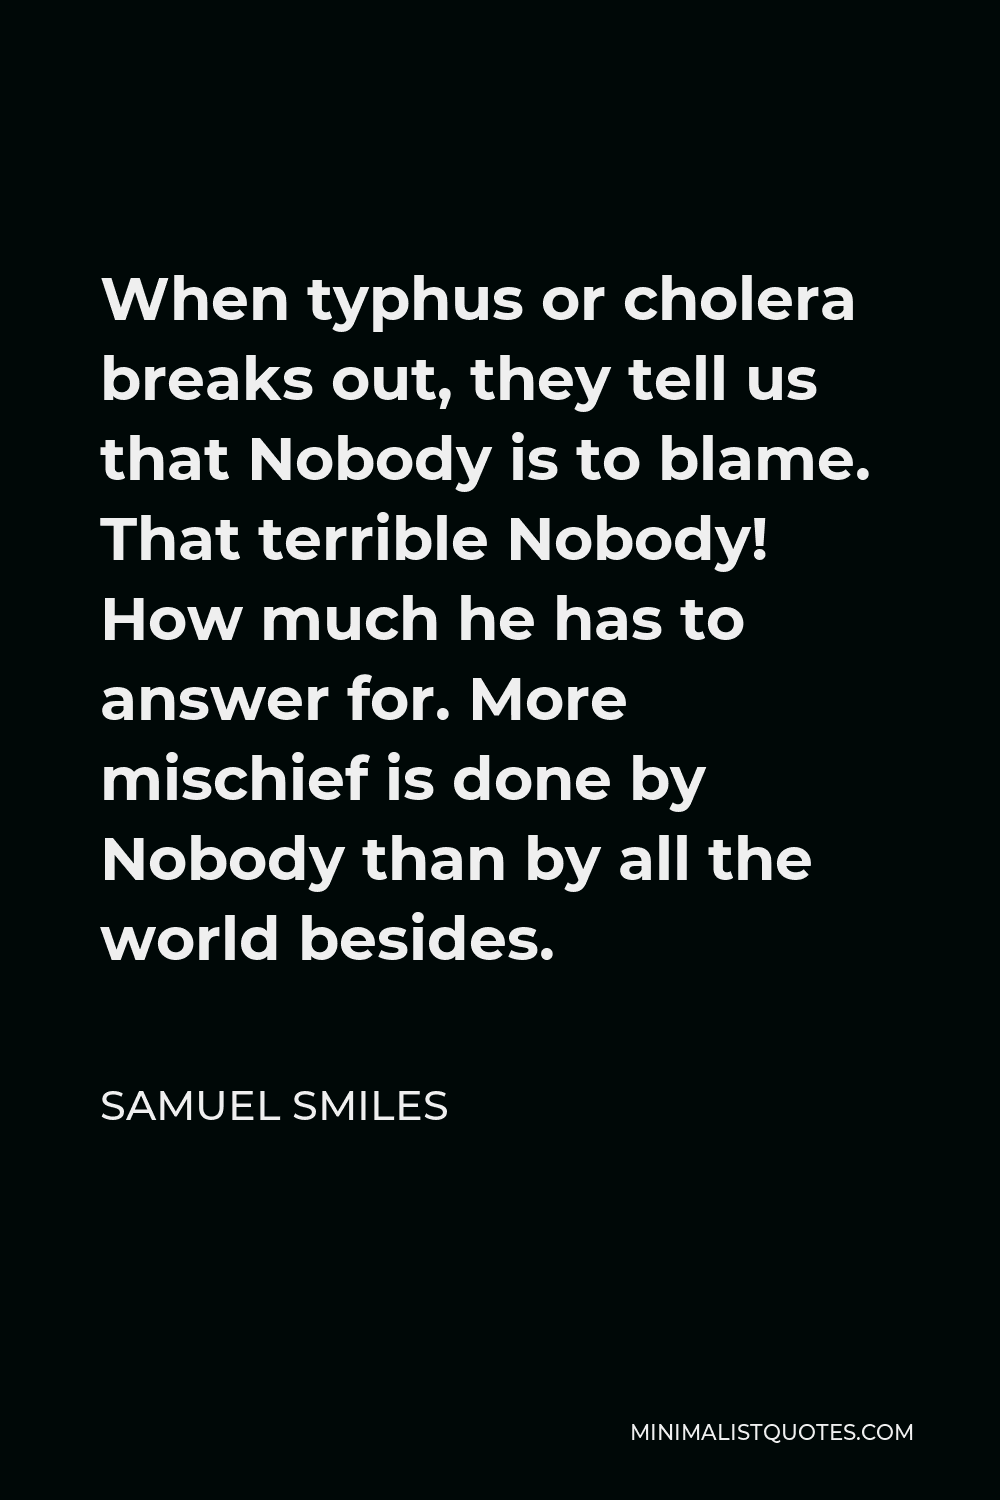 Samuel Smiles Quote - When typhus or cholera breaks out, they tell us that Nobody is to blame. That terrible Nobody! How much he has to answer for. More mischief is done by Nobody than by all the world besides.